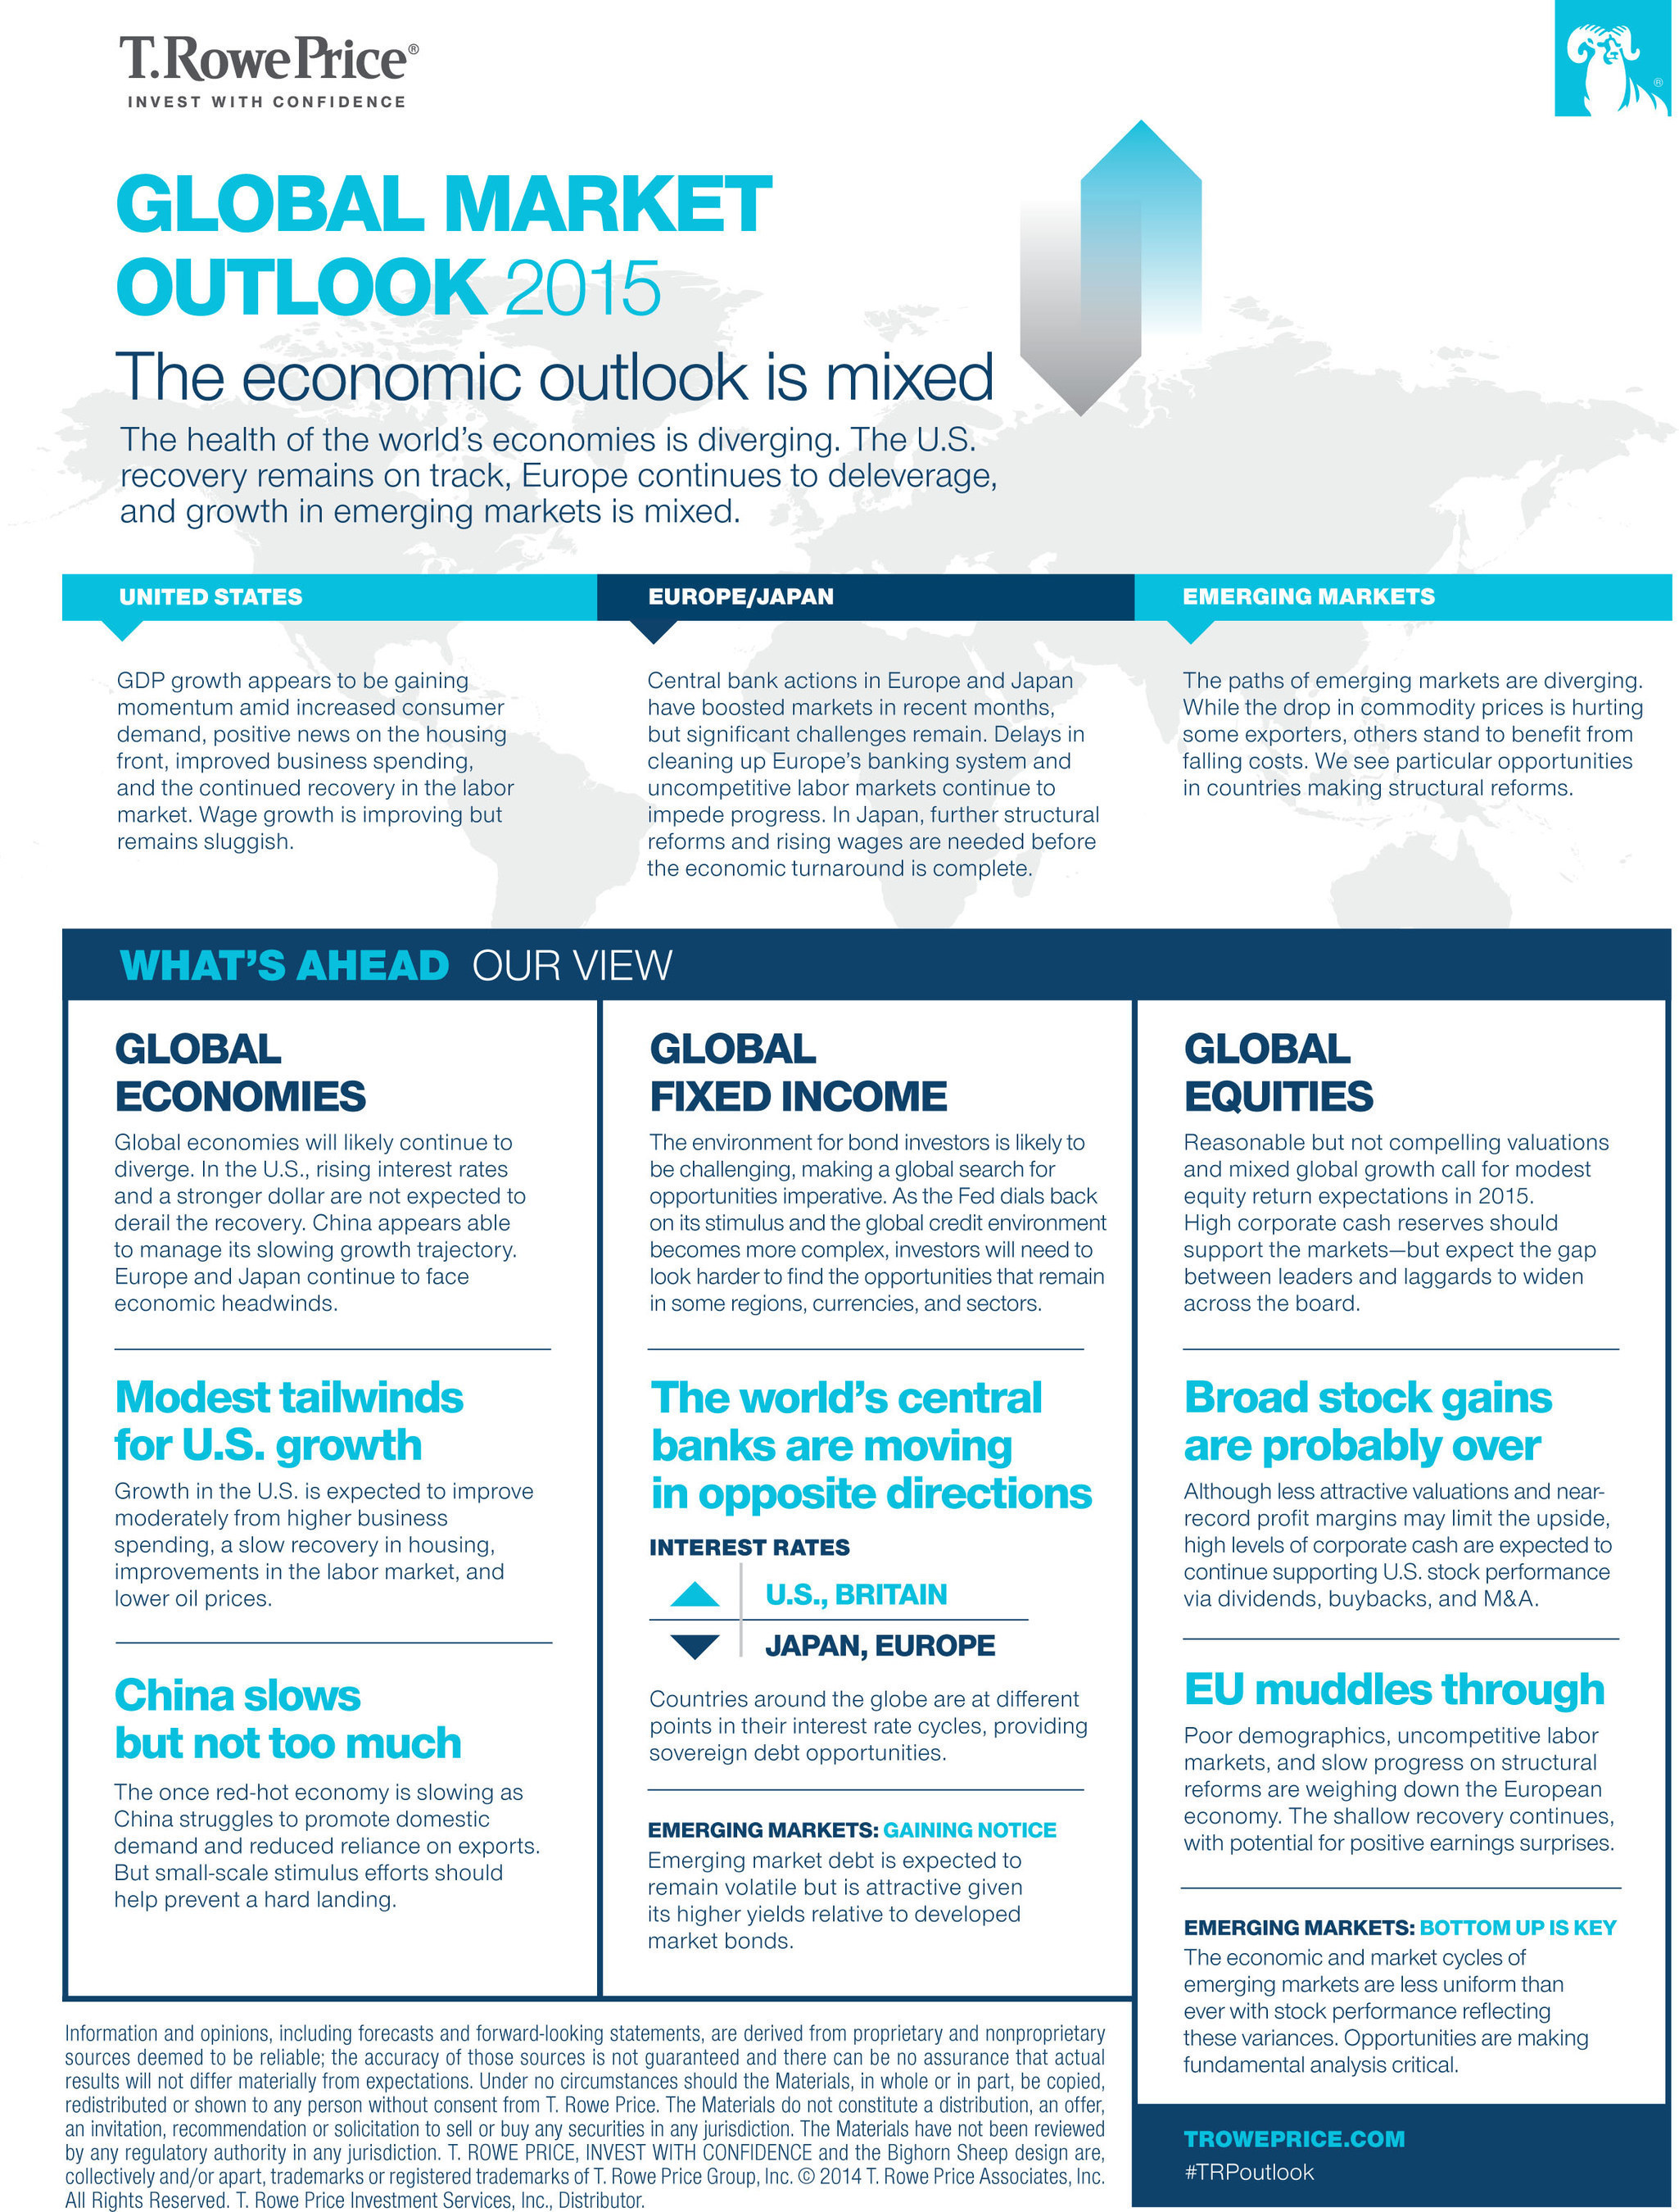 Graphic: T. Rowe Price's 2015 Global Market Outlook